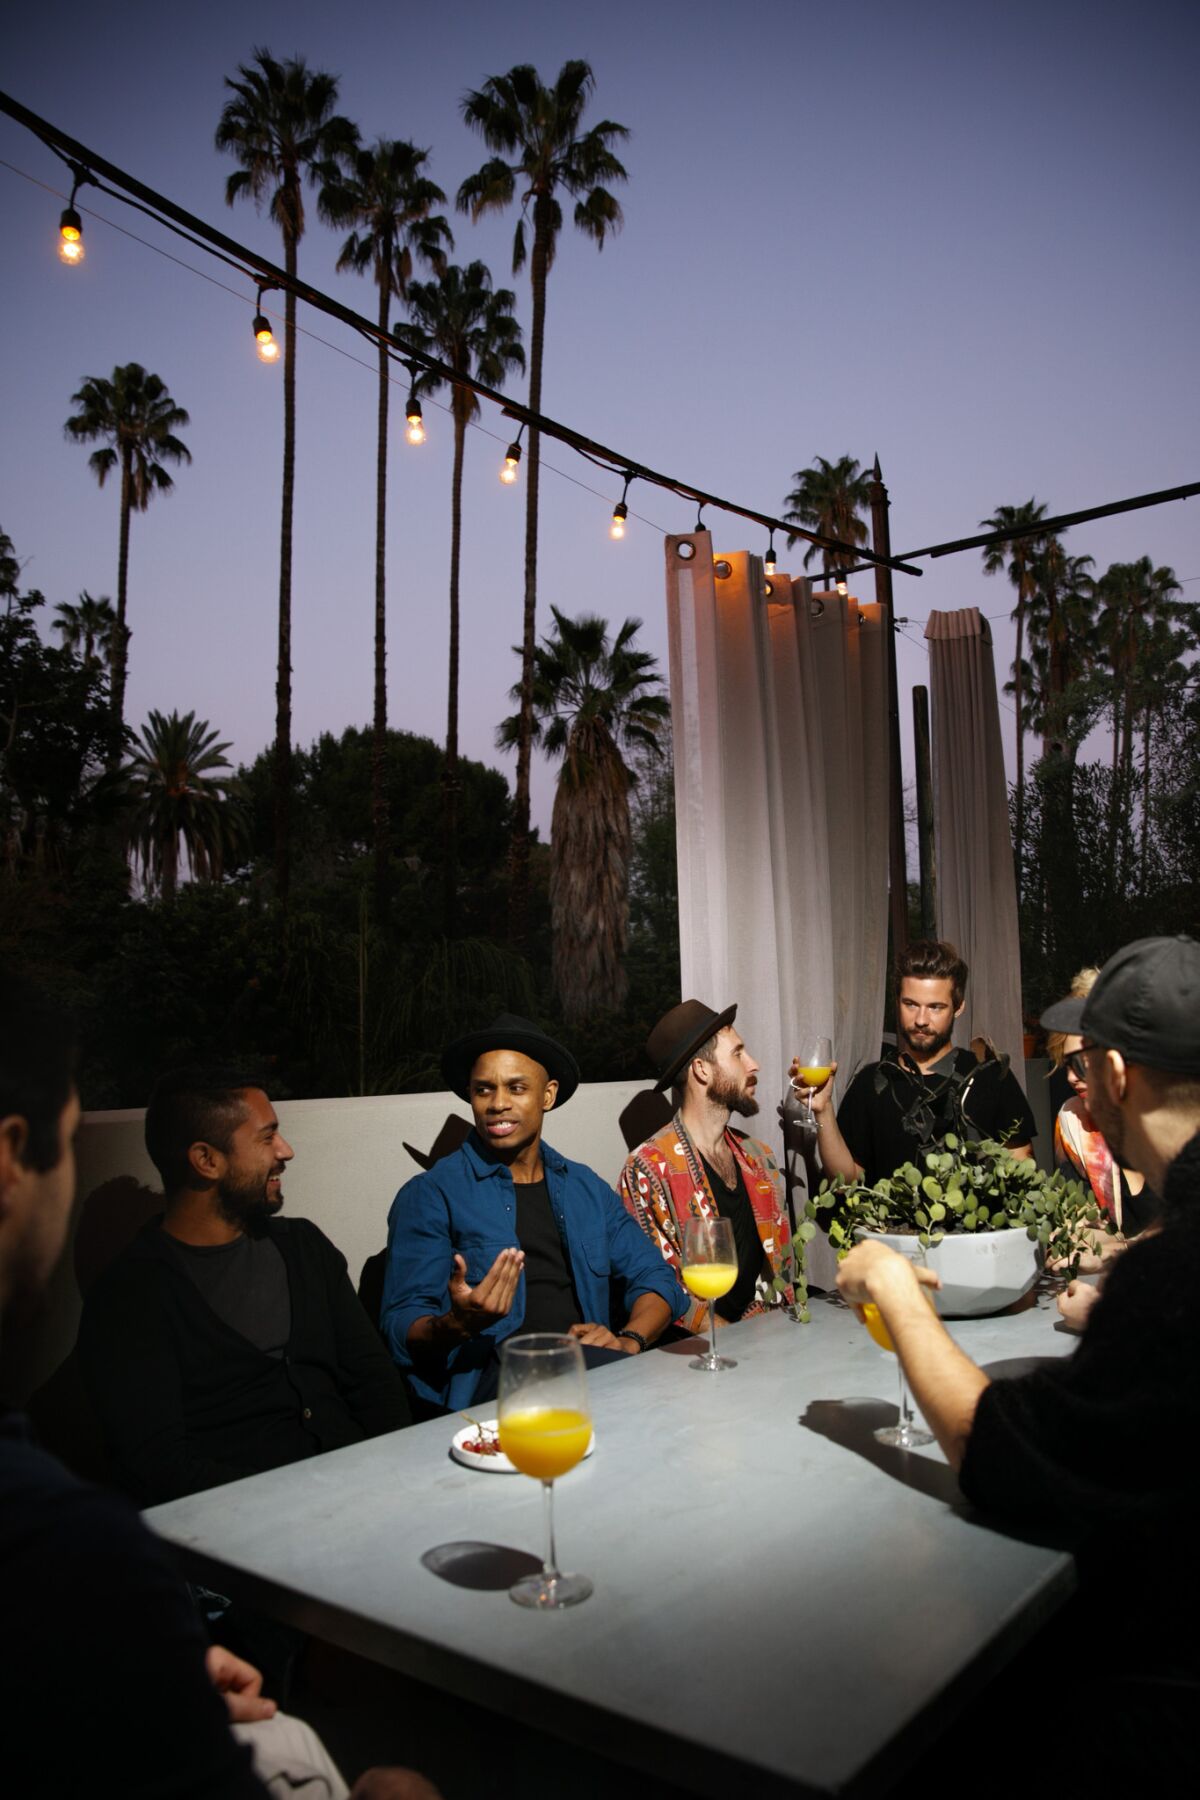 Matty Pipes and friends enjoy the outdoors beneath a simple string of lights in Hollywood.